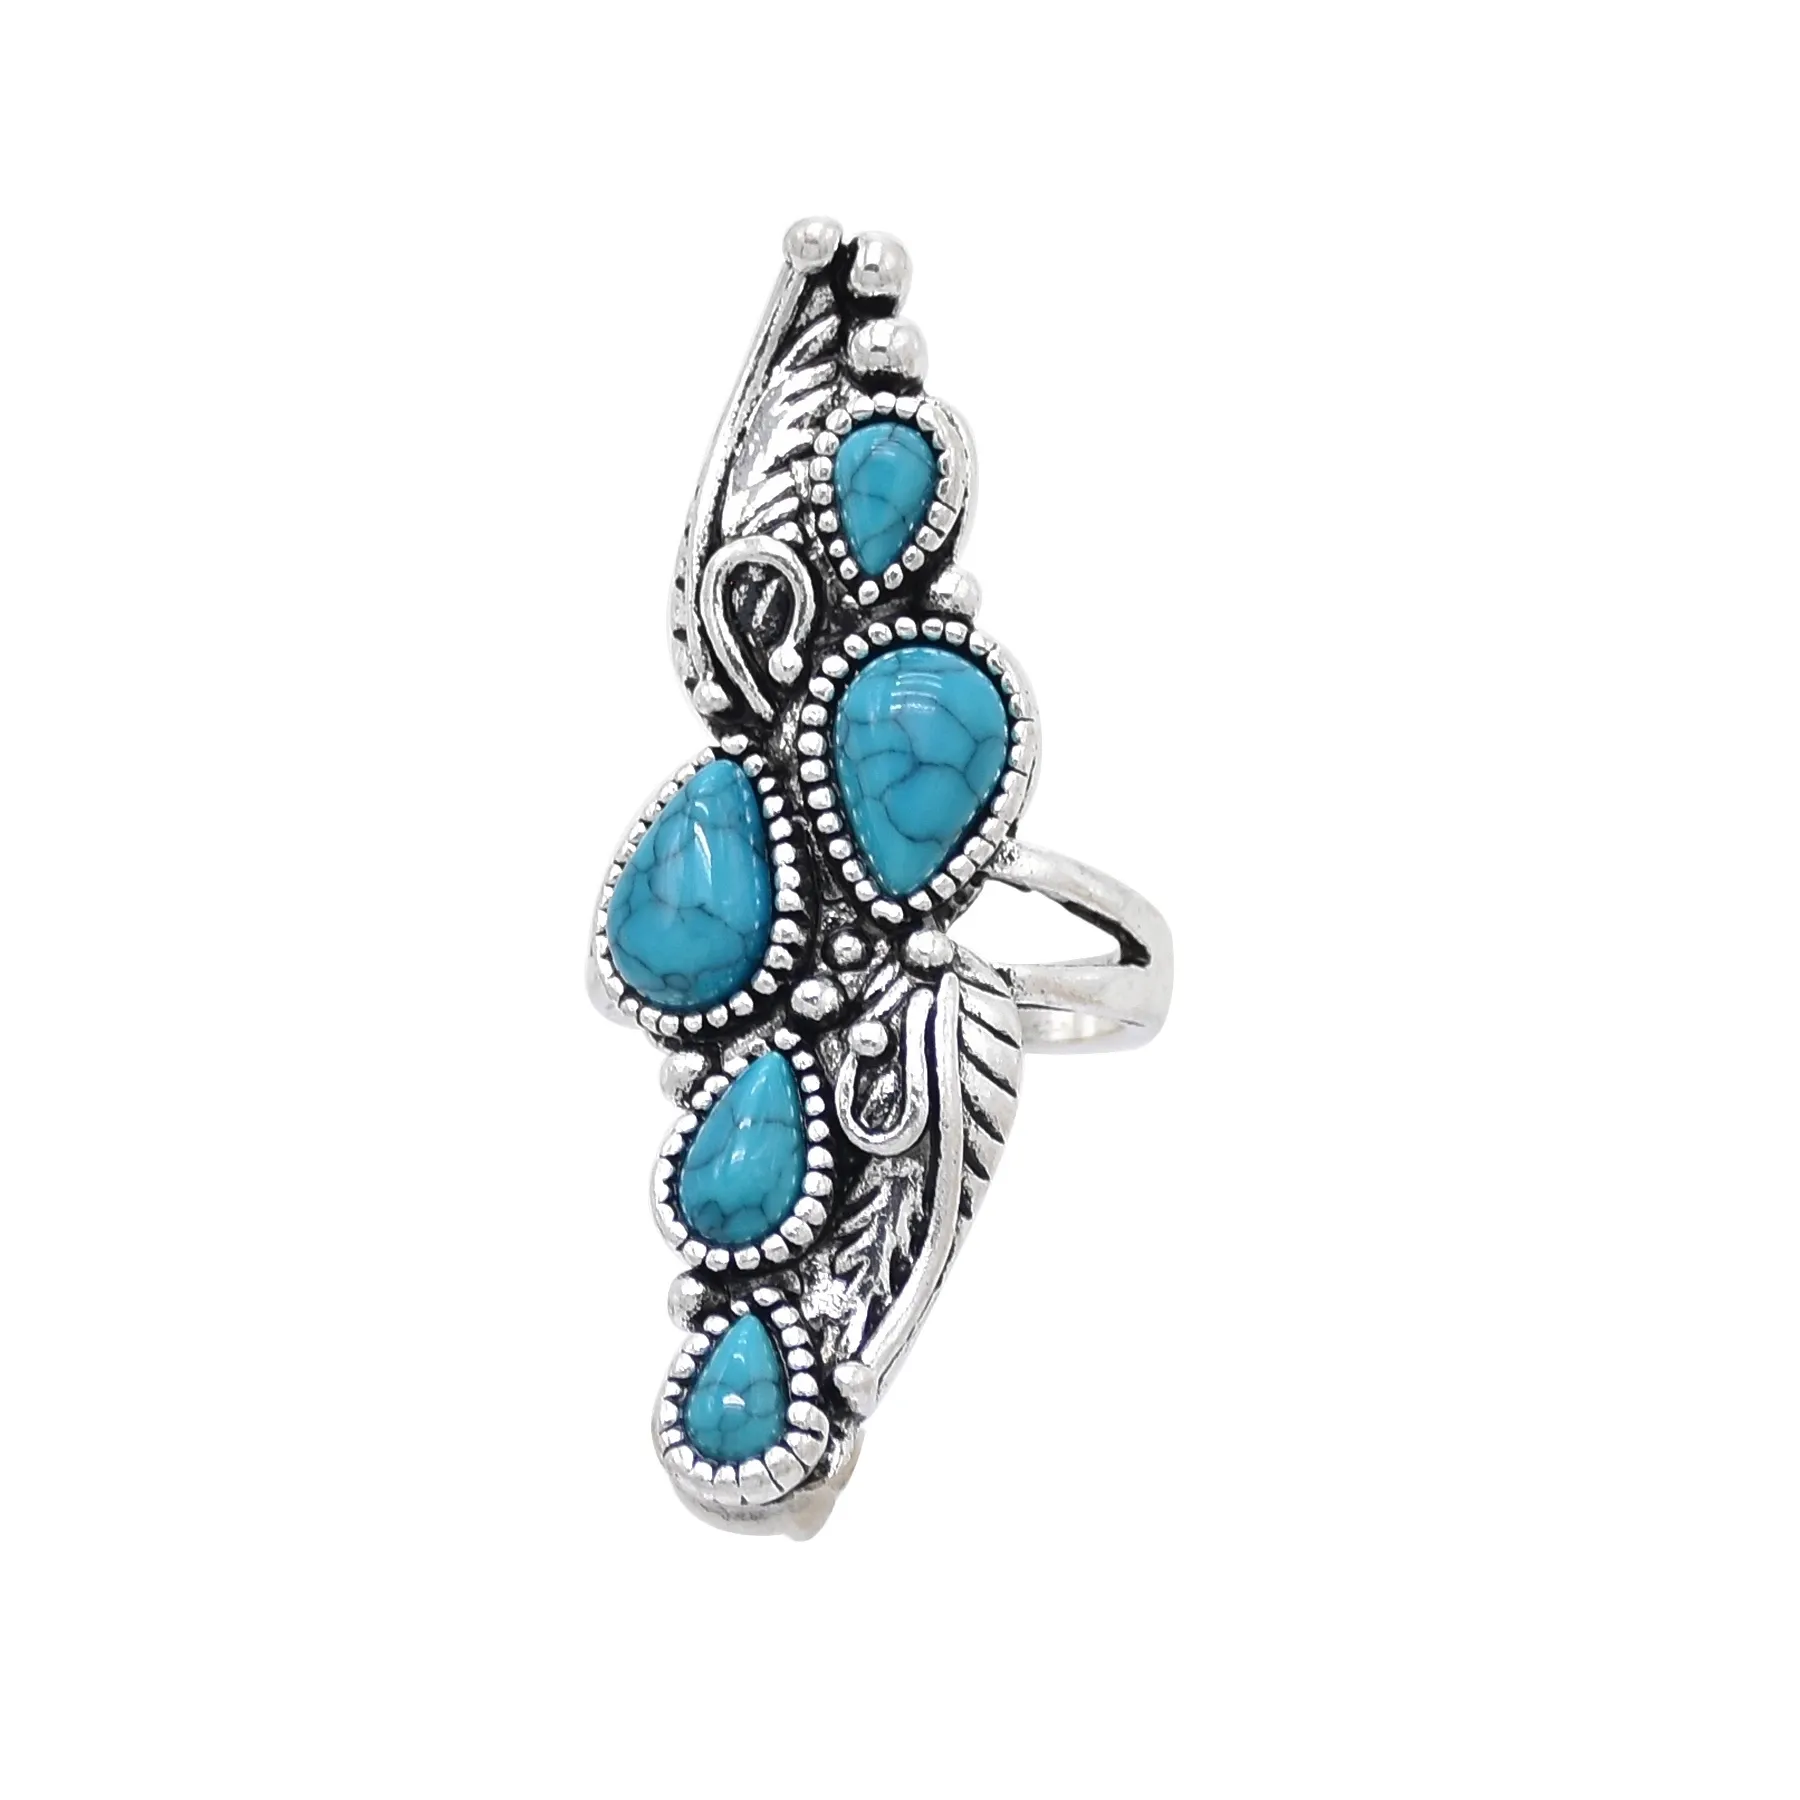 Vintage Turquoise Ring Siver Color Alloy Bohemian Style Droplet gemstone Leaf Type Rings For Women